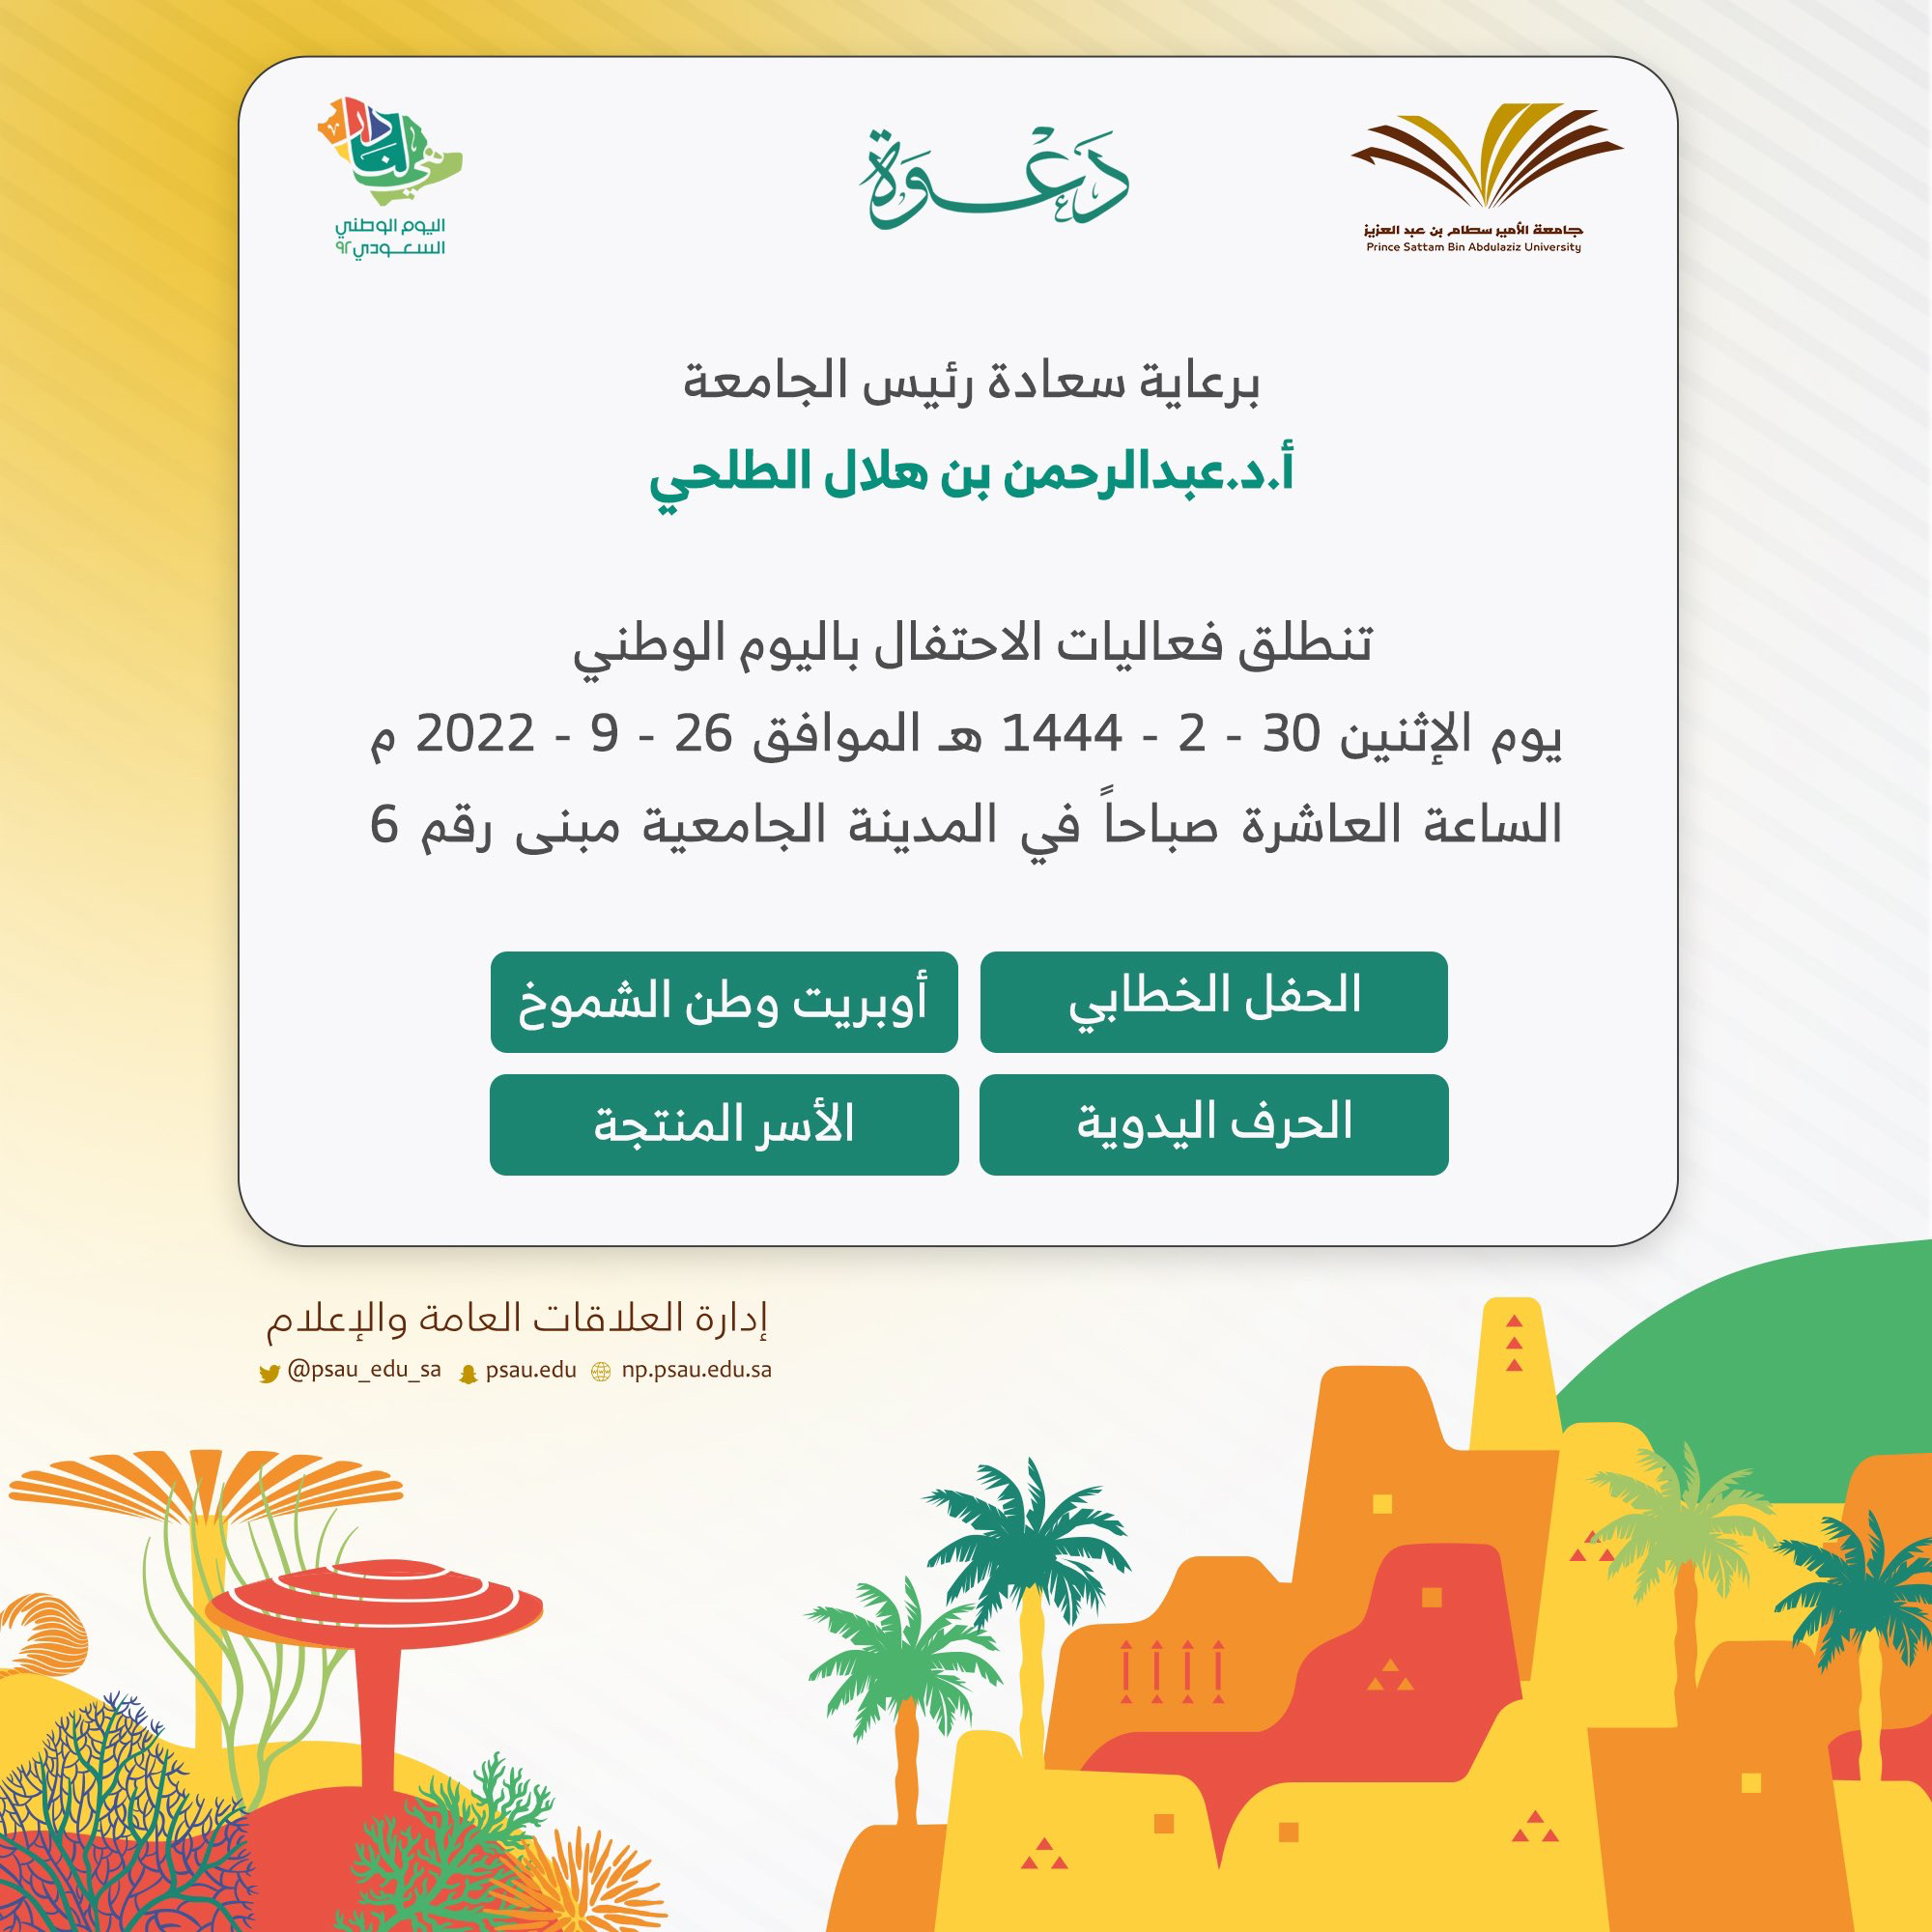 Invitation of the President of the University  Excellencyto attend the 92nd National Day Activities